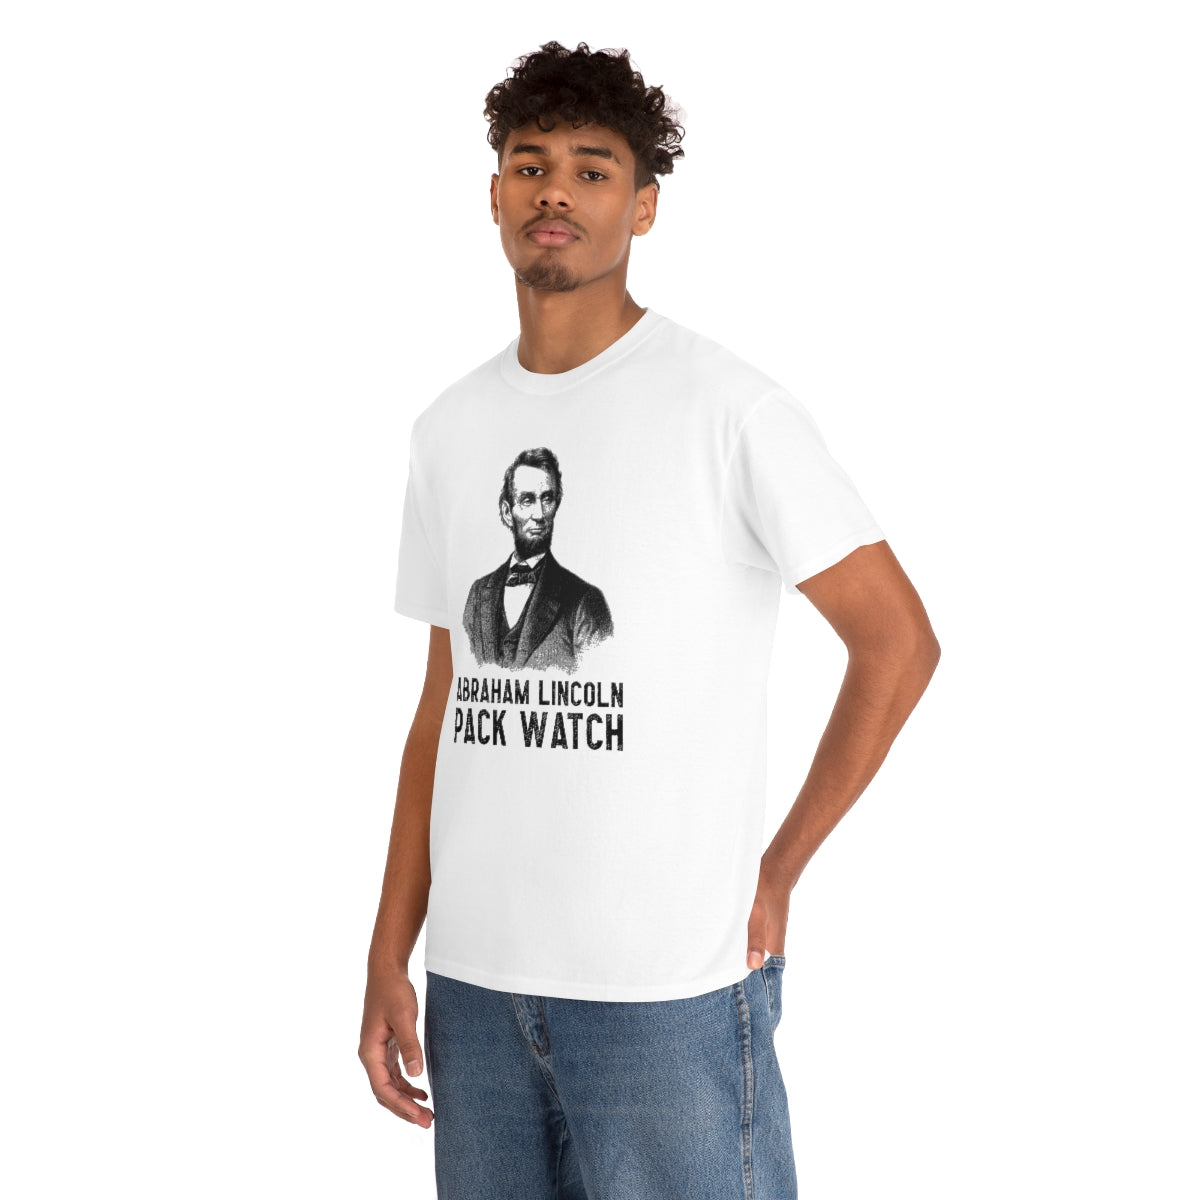 Abraham Lincoln Pack Watch - Unisex Heavy Cotton Tee - All Colors